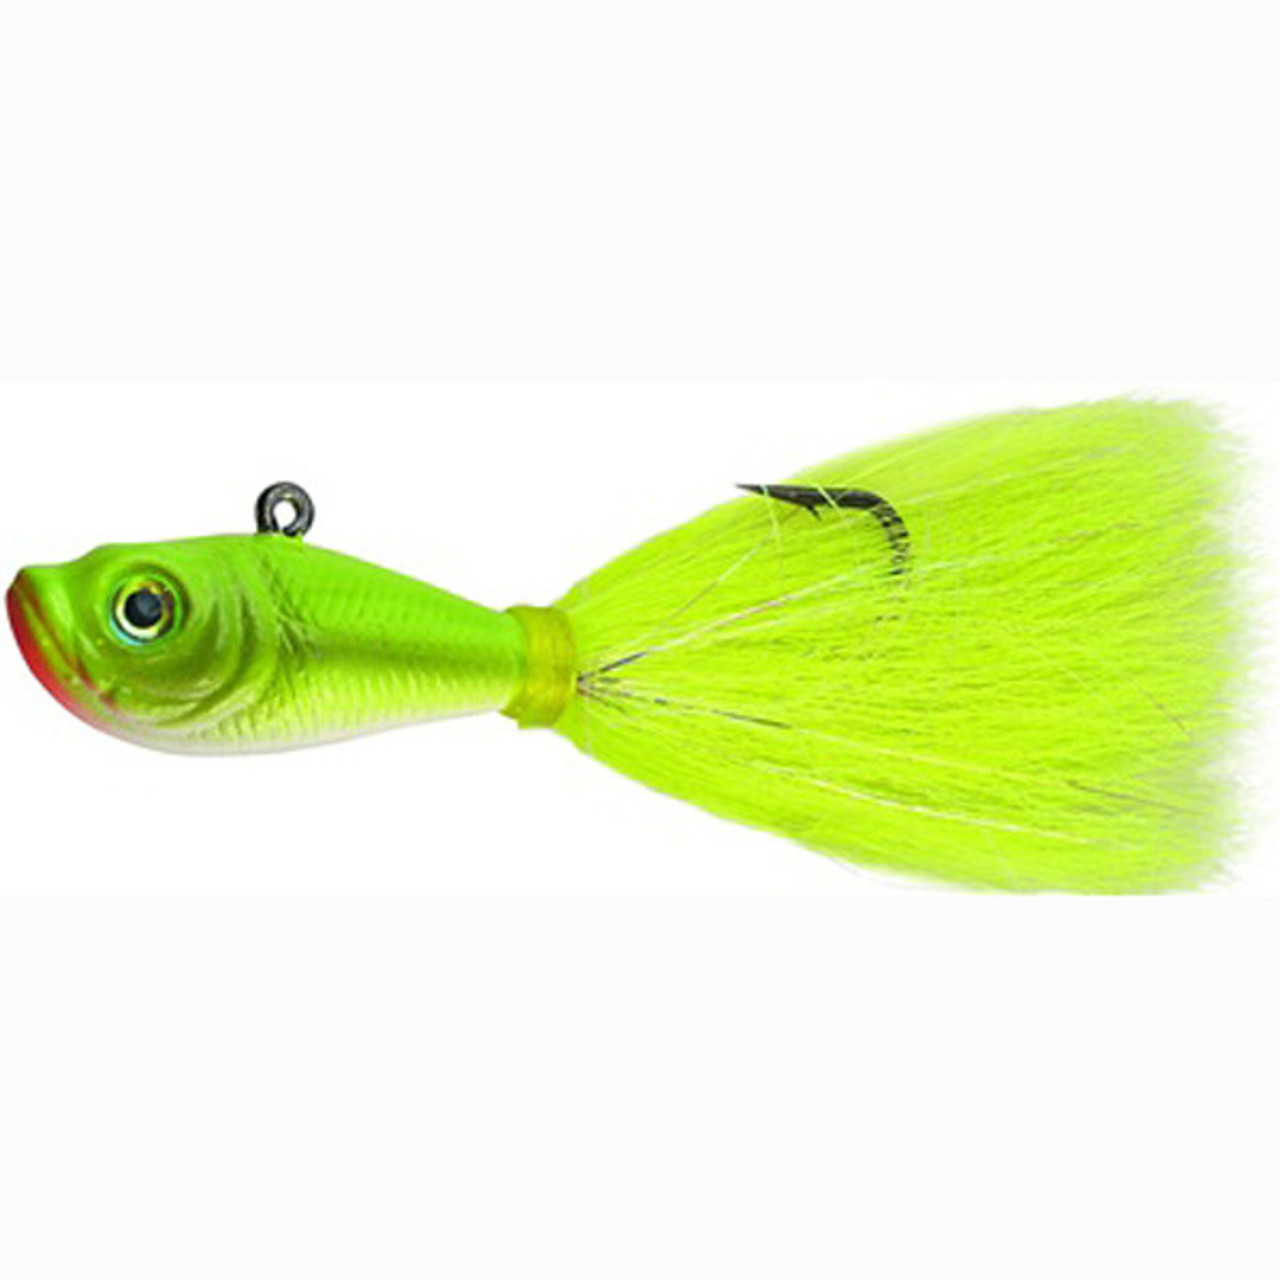 Spro Buck Tail Jig 3oz Crazy Chartreuse